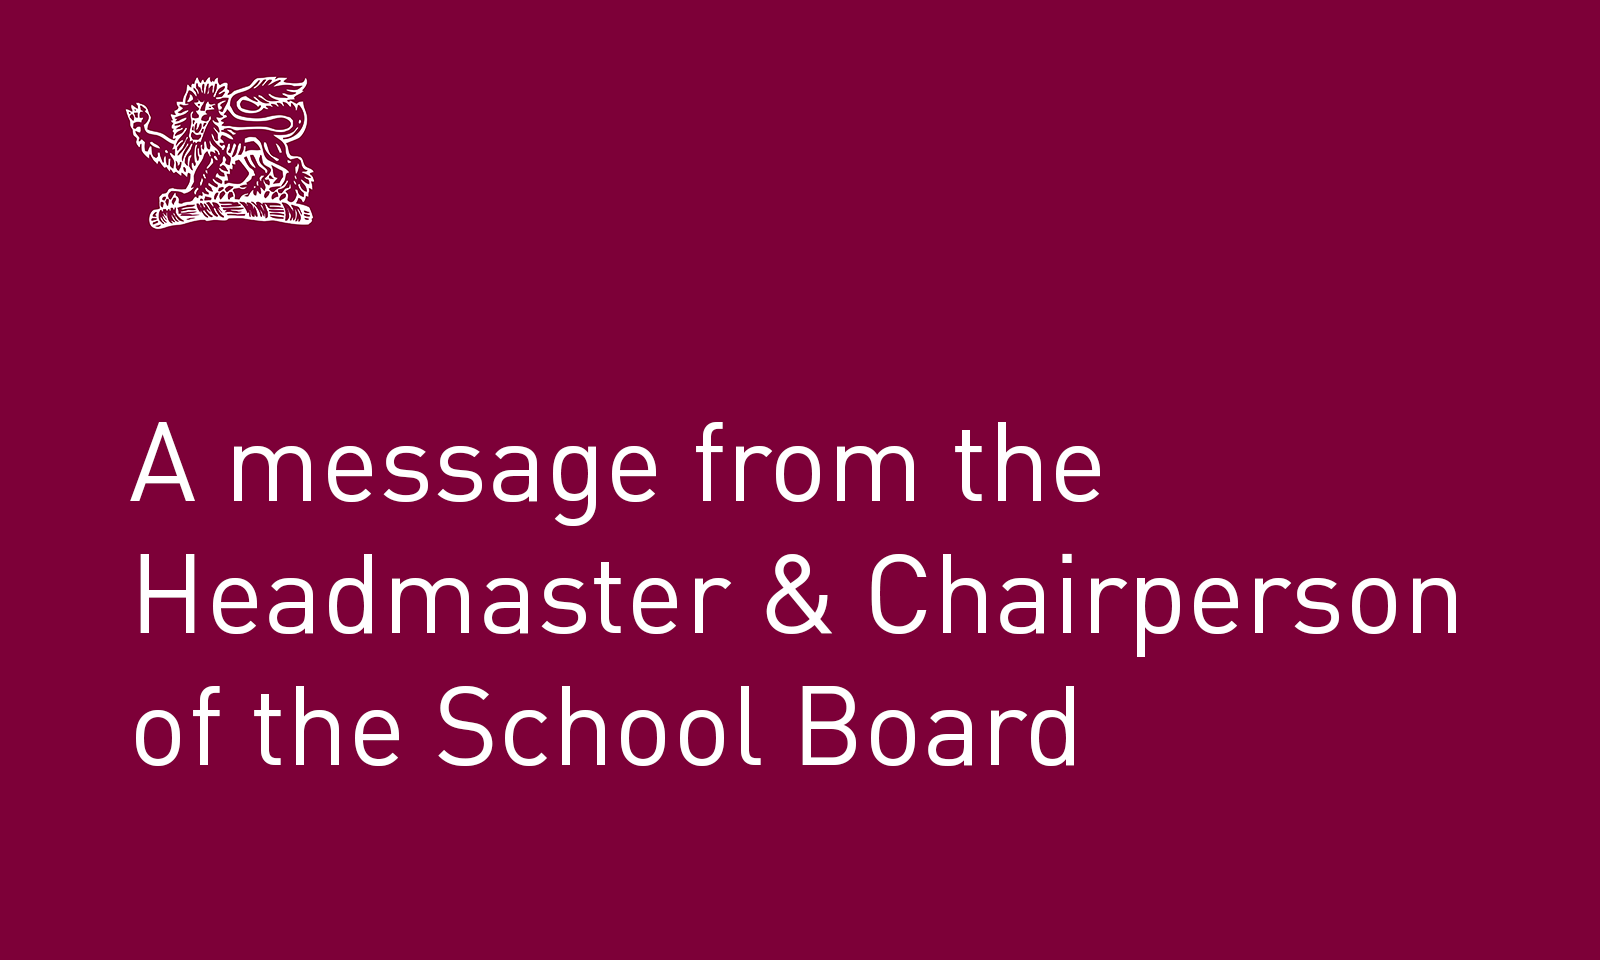 A message from the Headmaster and Chairperson of the School Board